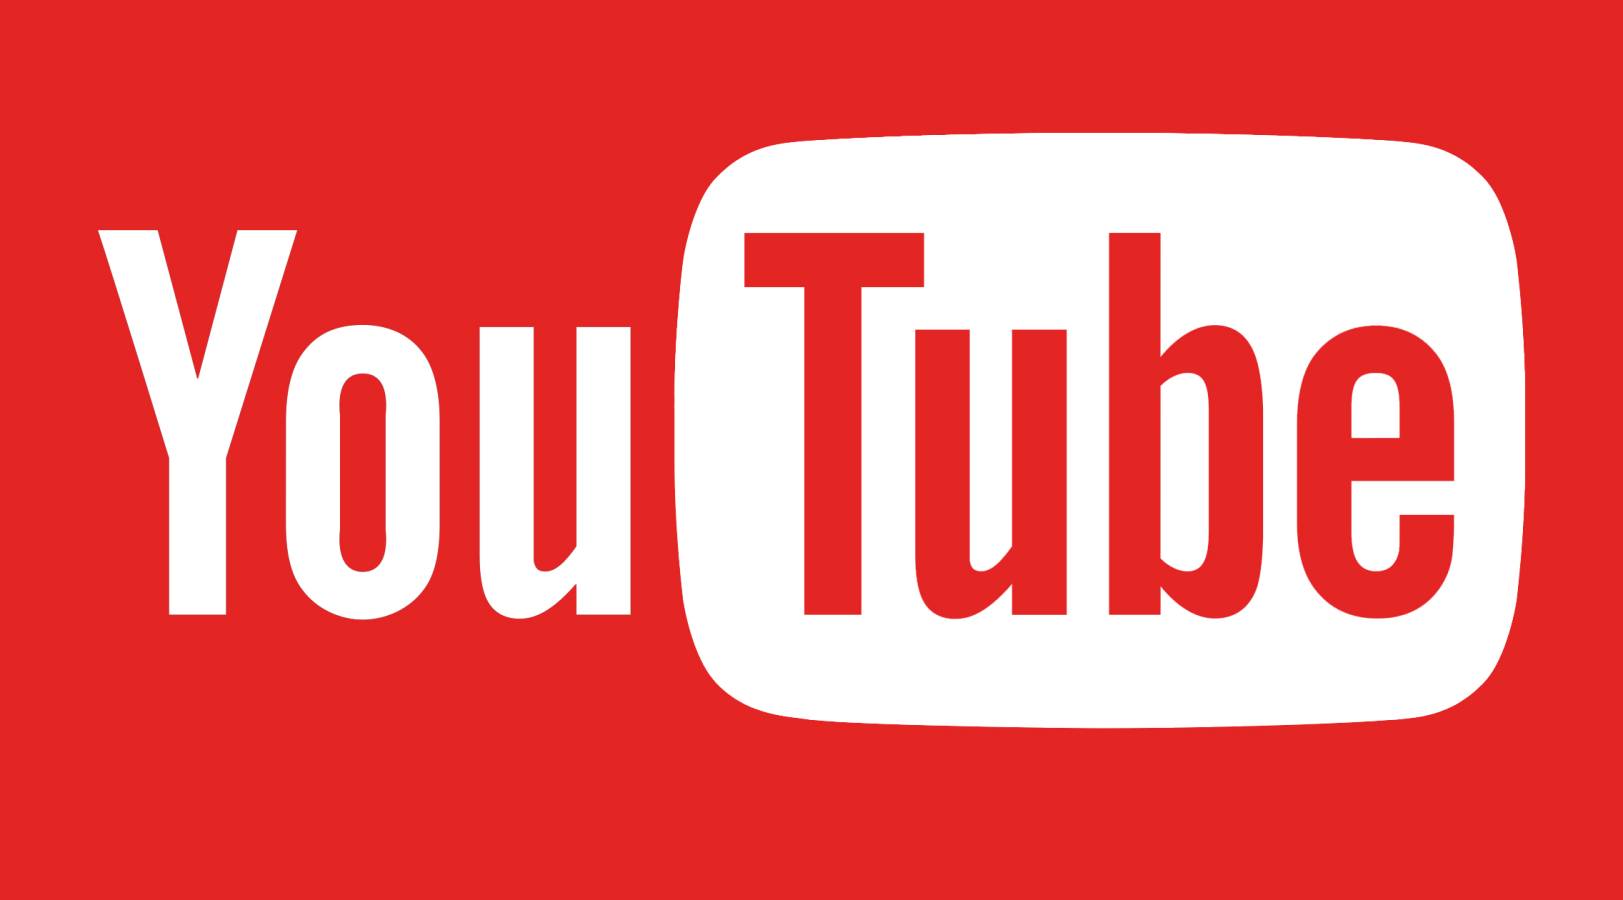 YouTube Update is Available, which are the News Brought to Phones and Tablets